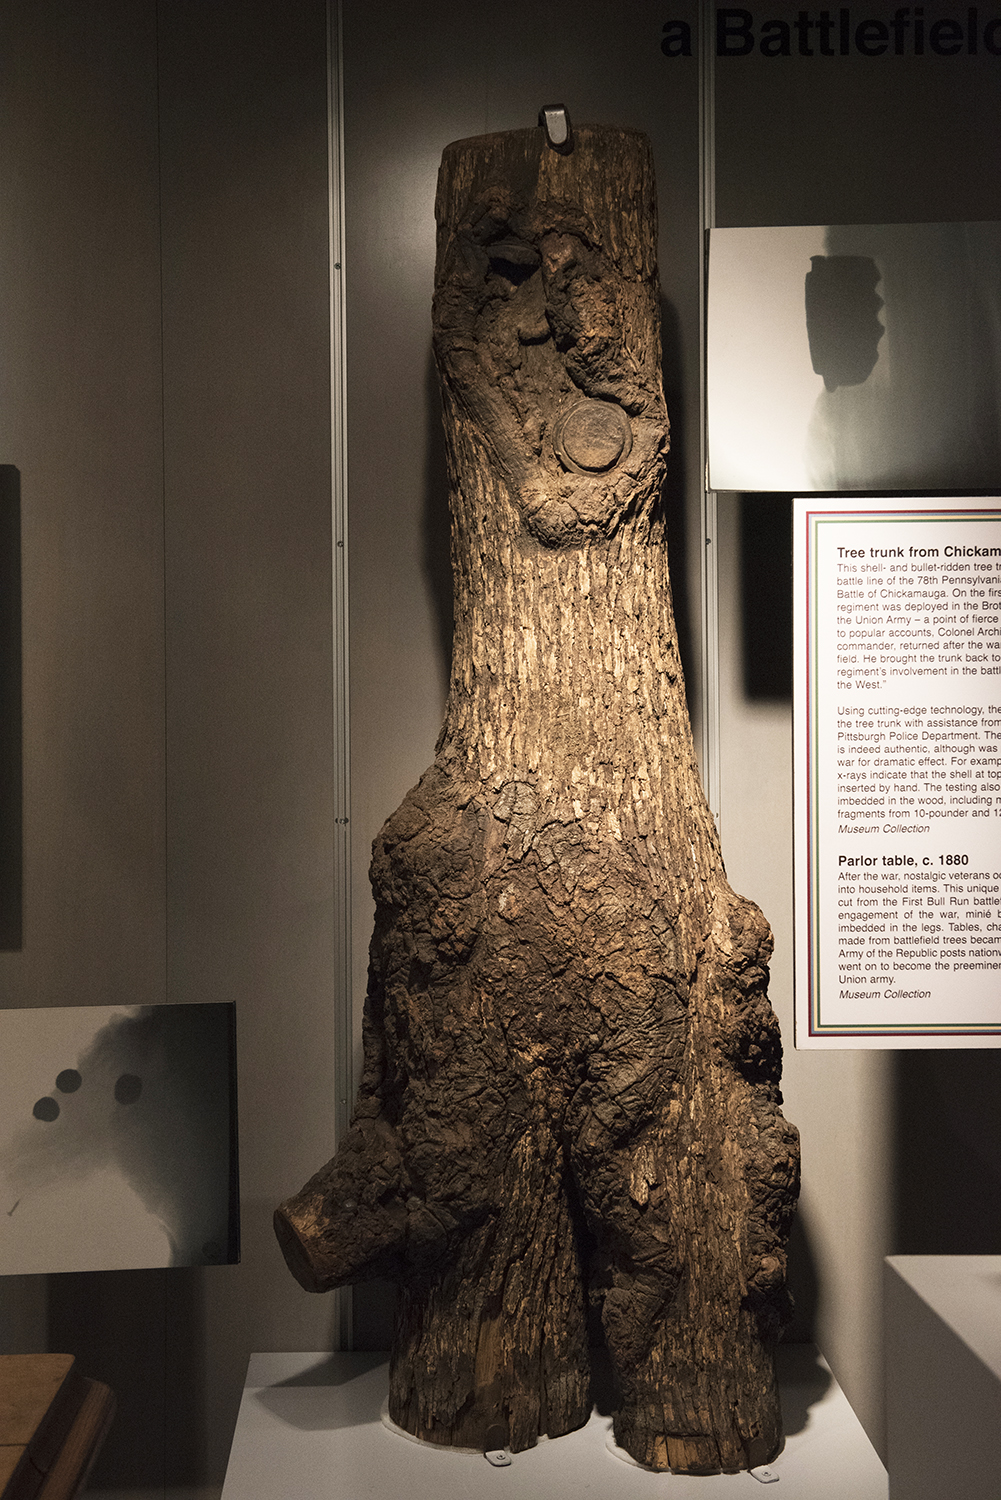 Tree trunk from Chickamauga Battlefield, 1863 | Special Collections Gallery, Heinz History Center